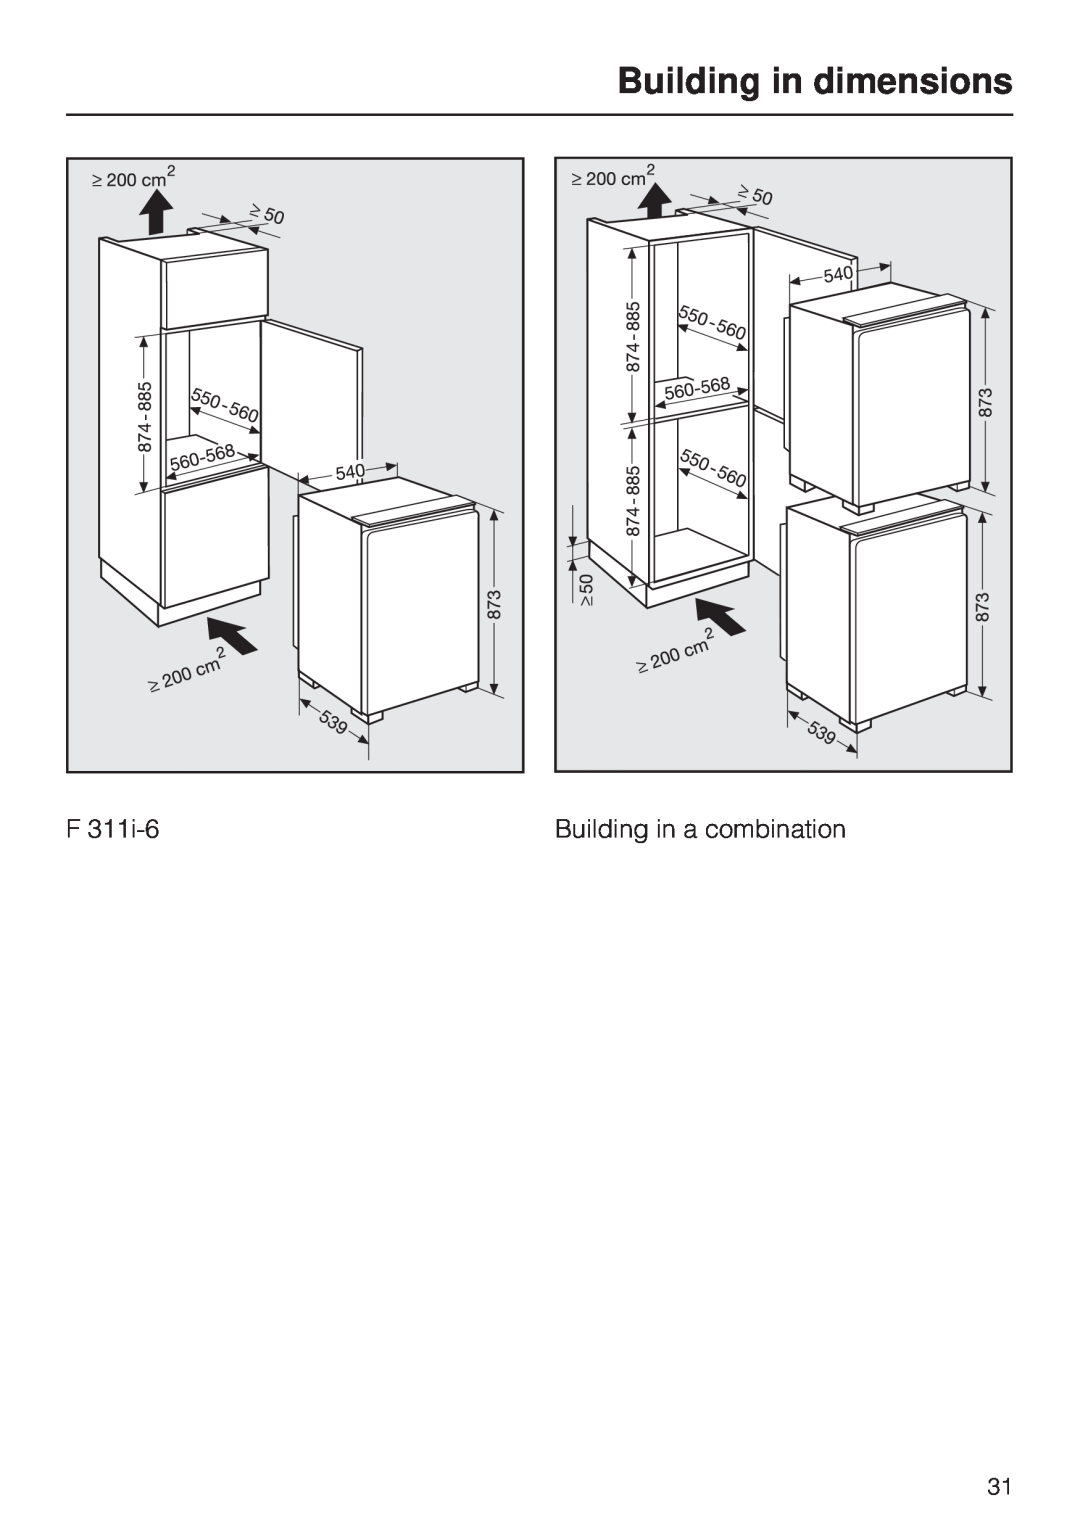 Miele F 311 i-6 installation instructions Building in dimensions, Building in a combination 